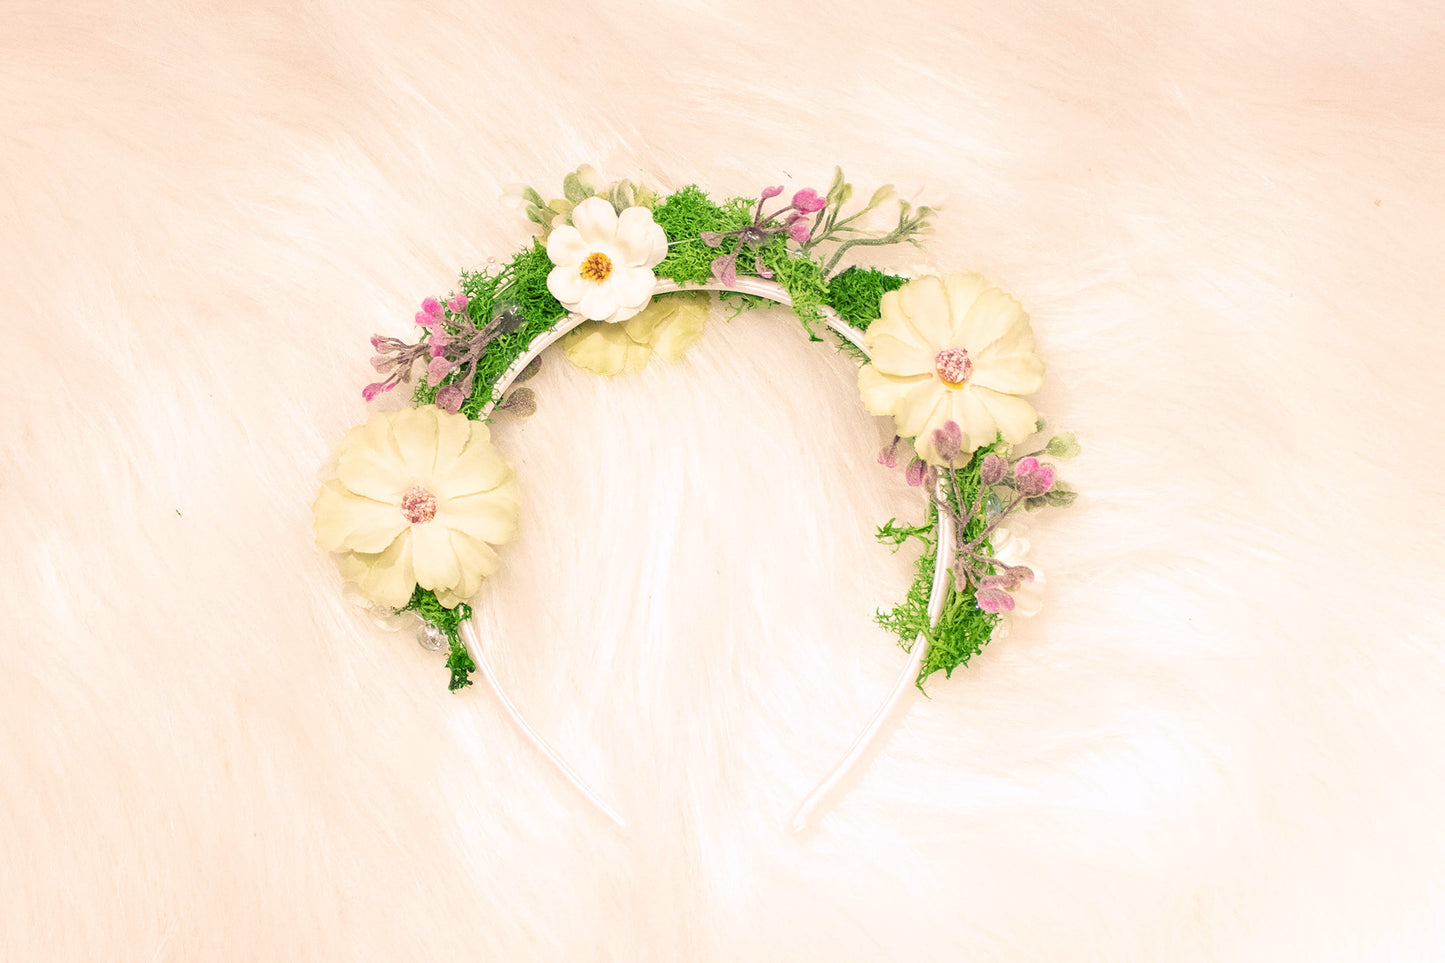 Floral headband with moss and white flowers